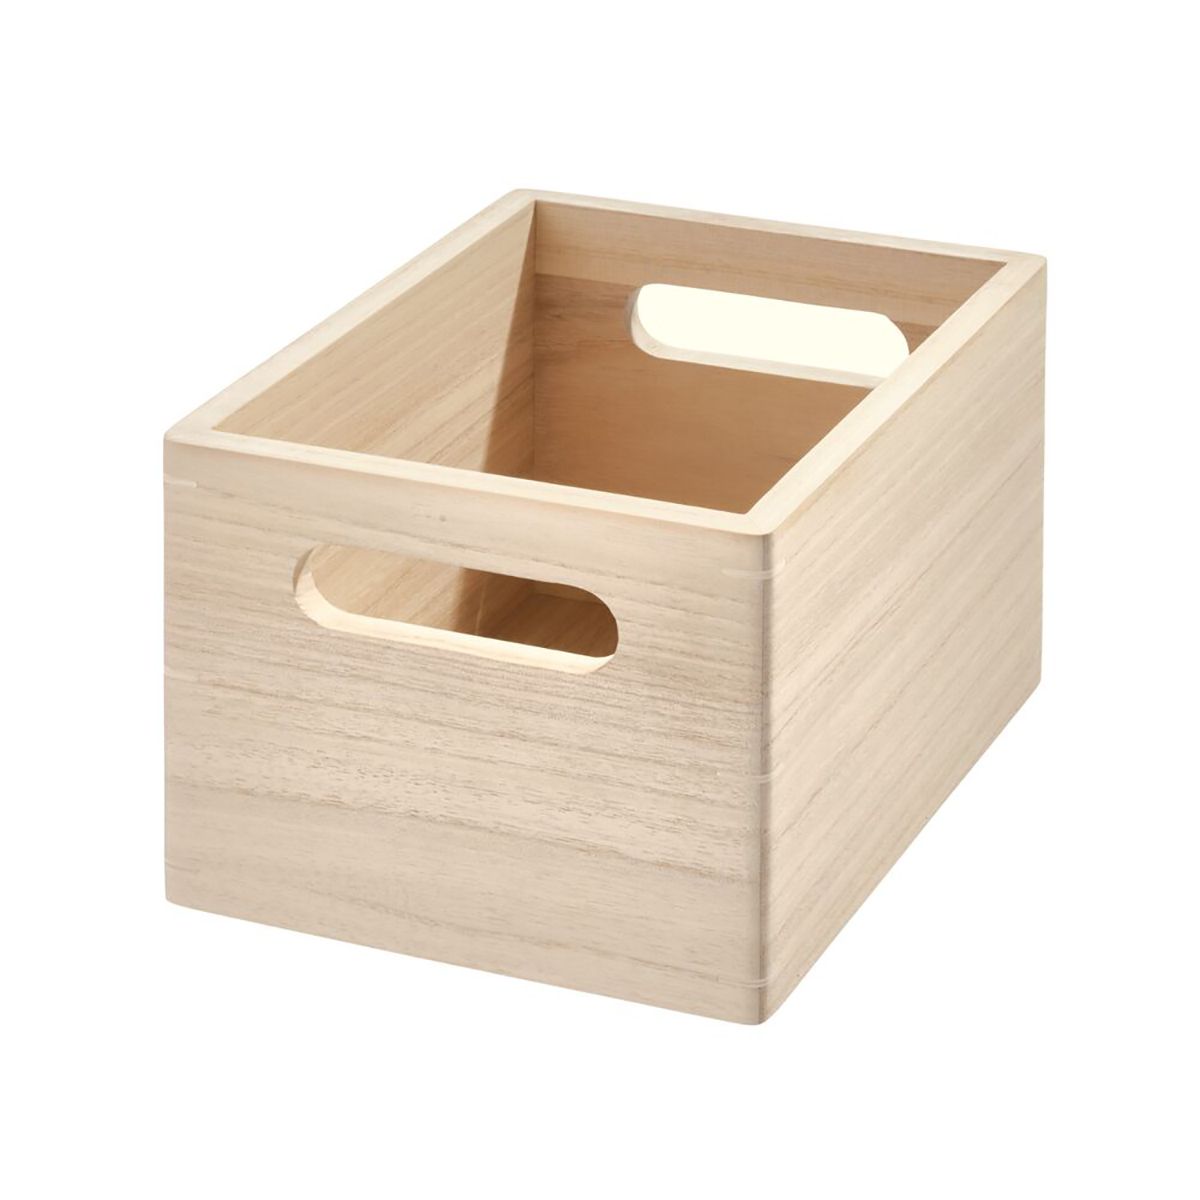 Wooden Narrow All Purpose Bin | The Container Store